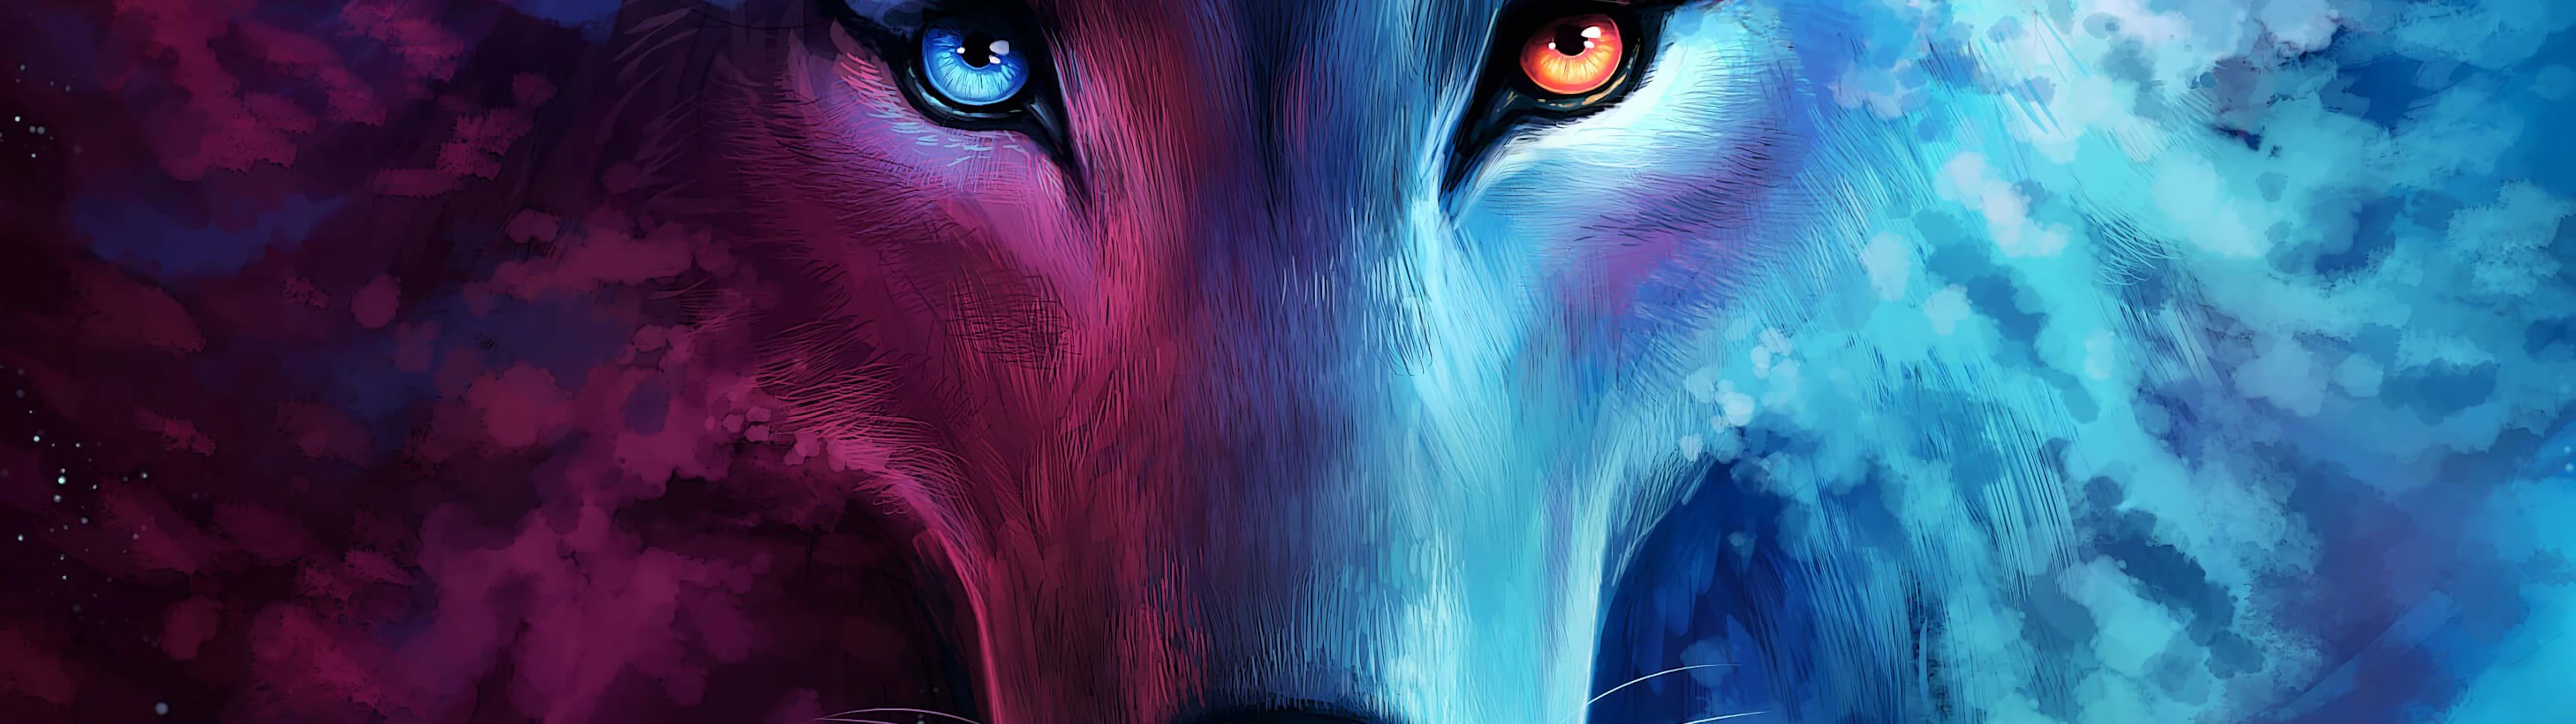 Wolf, Fantasy, Art, 4k, - Pink And Blue Wolf - HD Wallpaper 